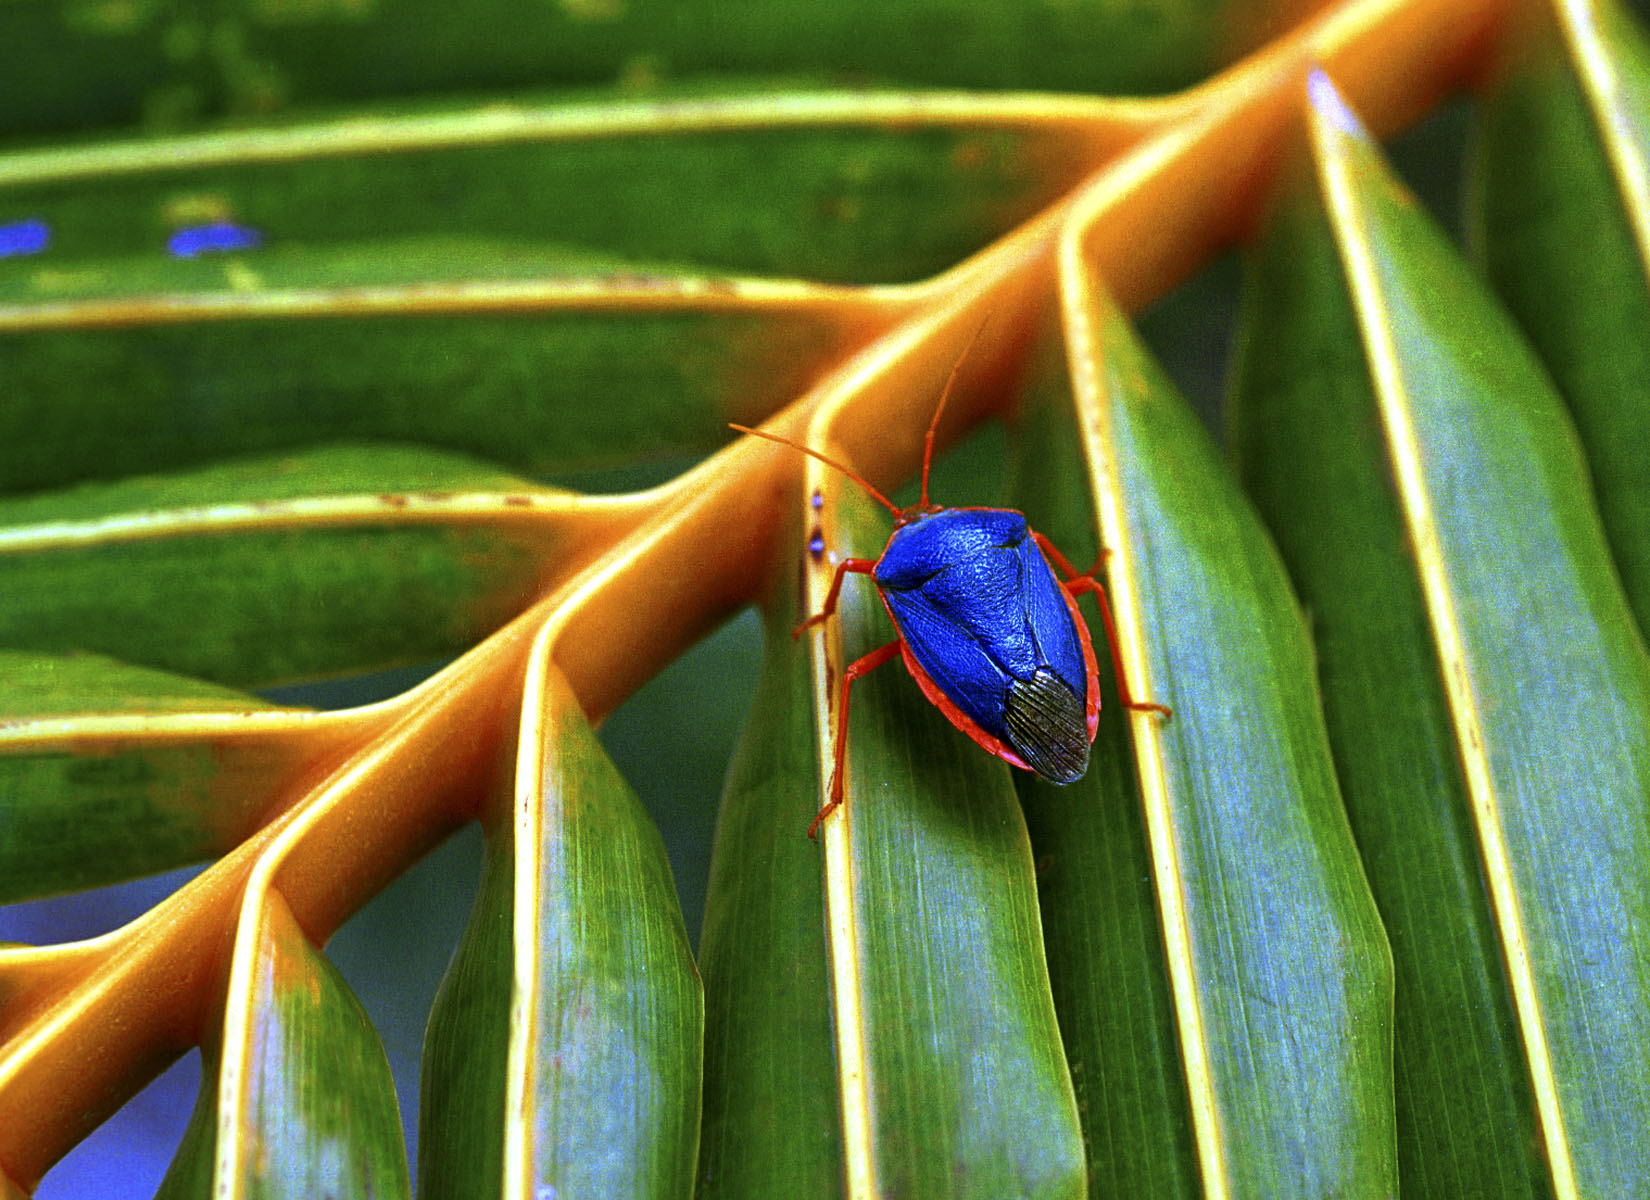  A shield bug, also known as a stinkbug, (Edessa rufomarginata) on a palm frond in Belize. 